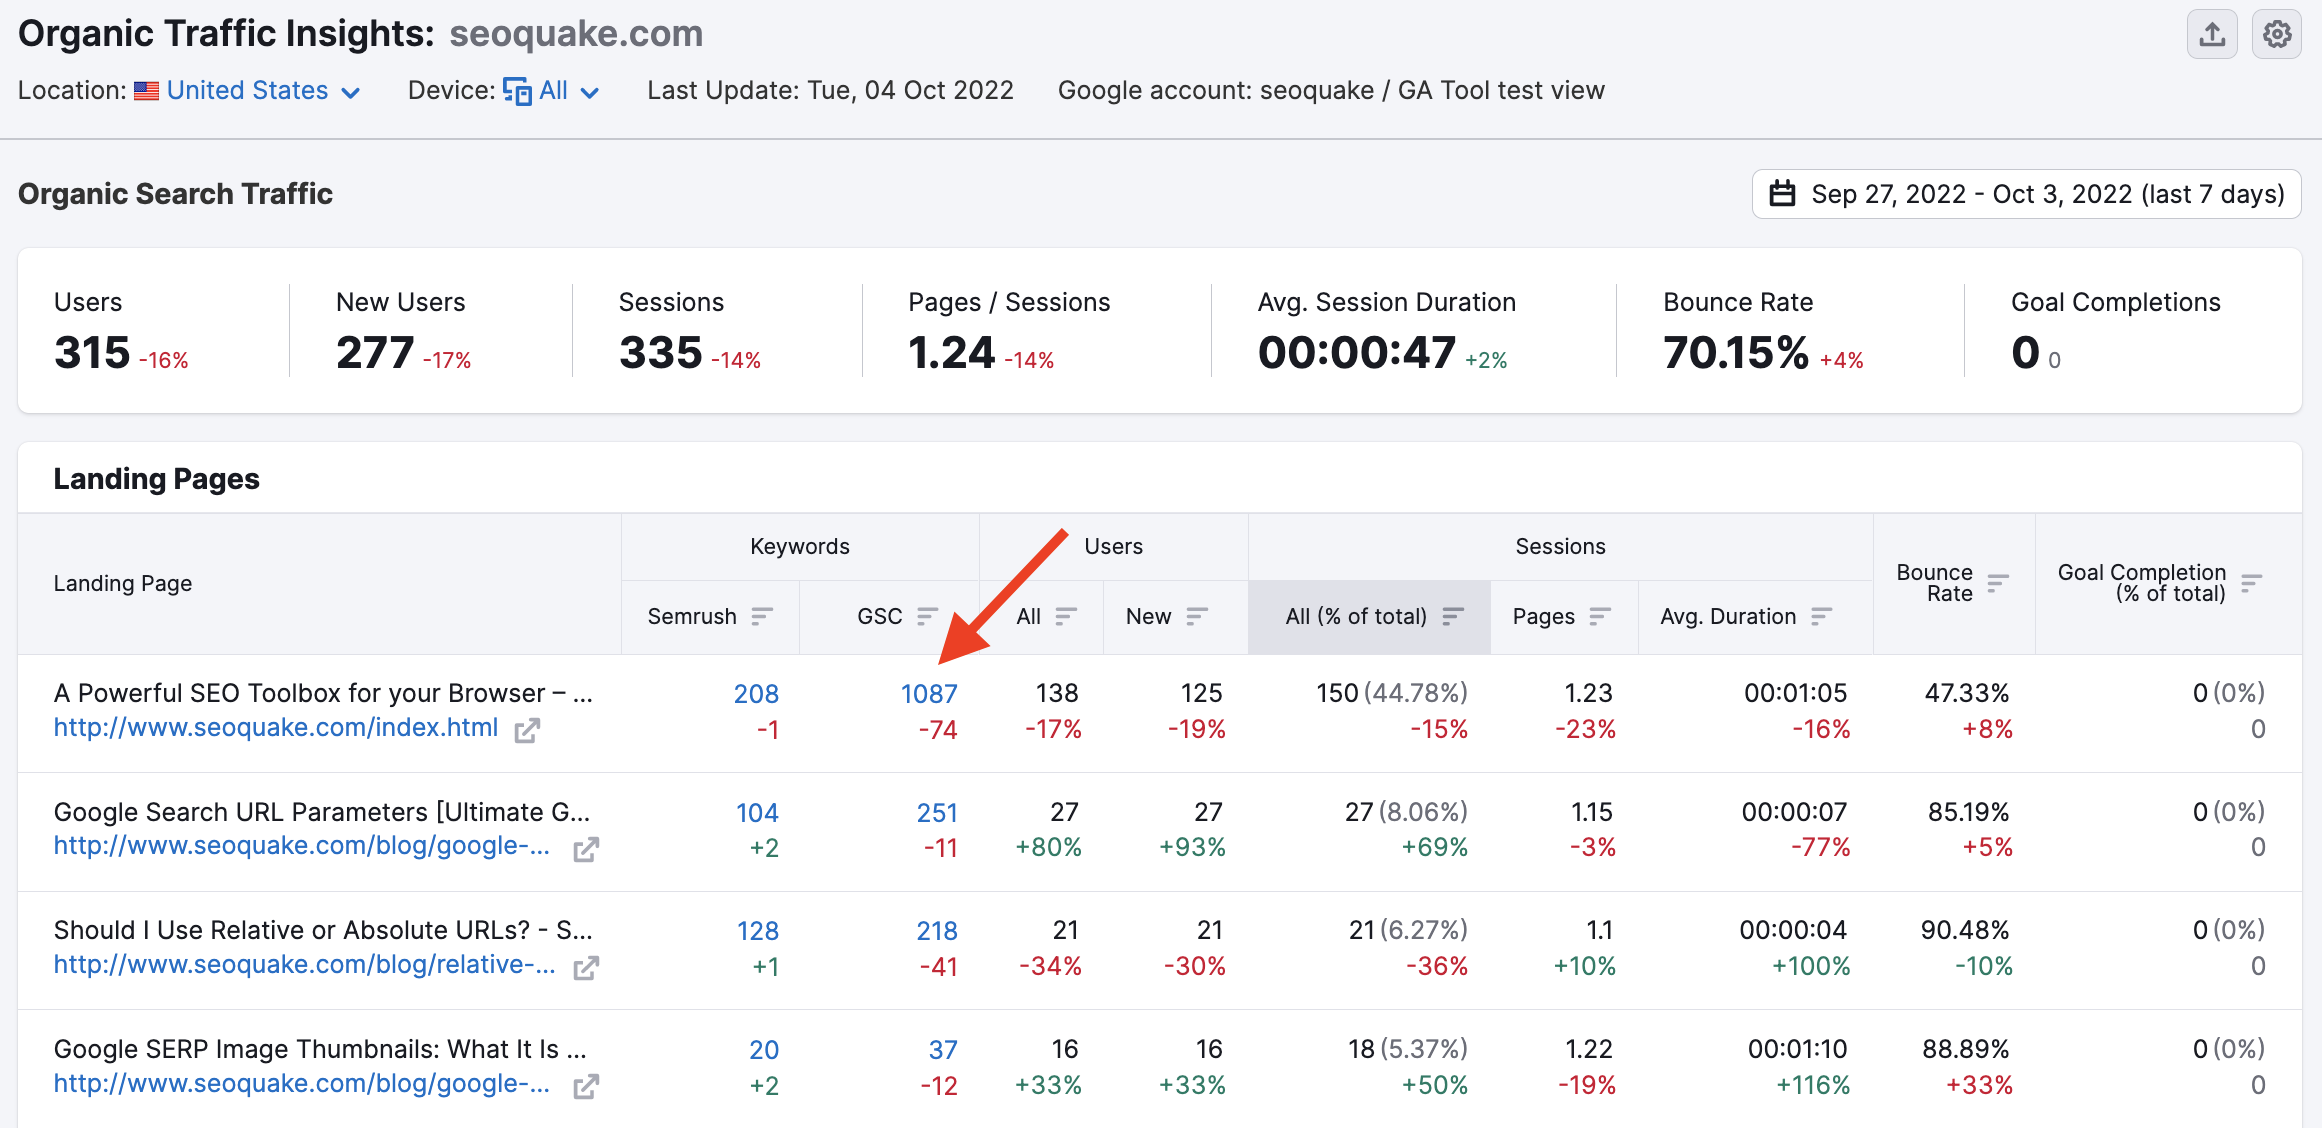 How does Organic Traffic Insights identify the (not provided) keywords from Google Analytics? image 1